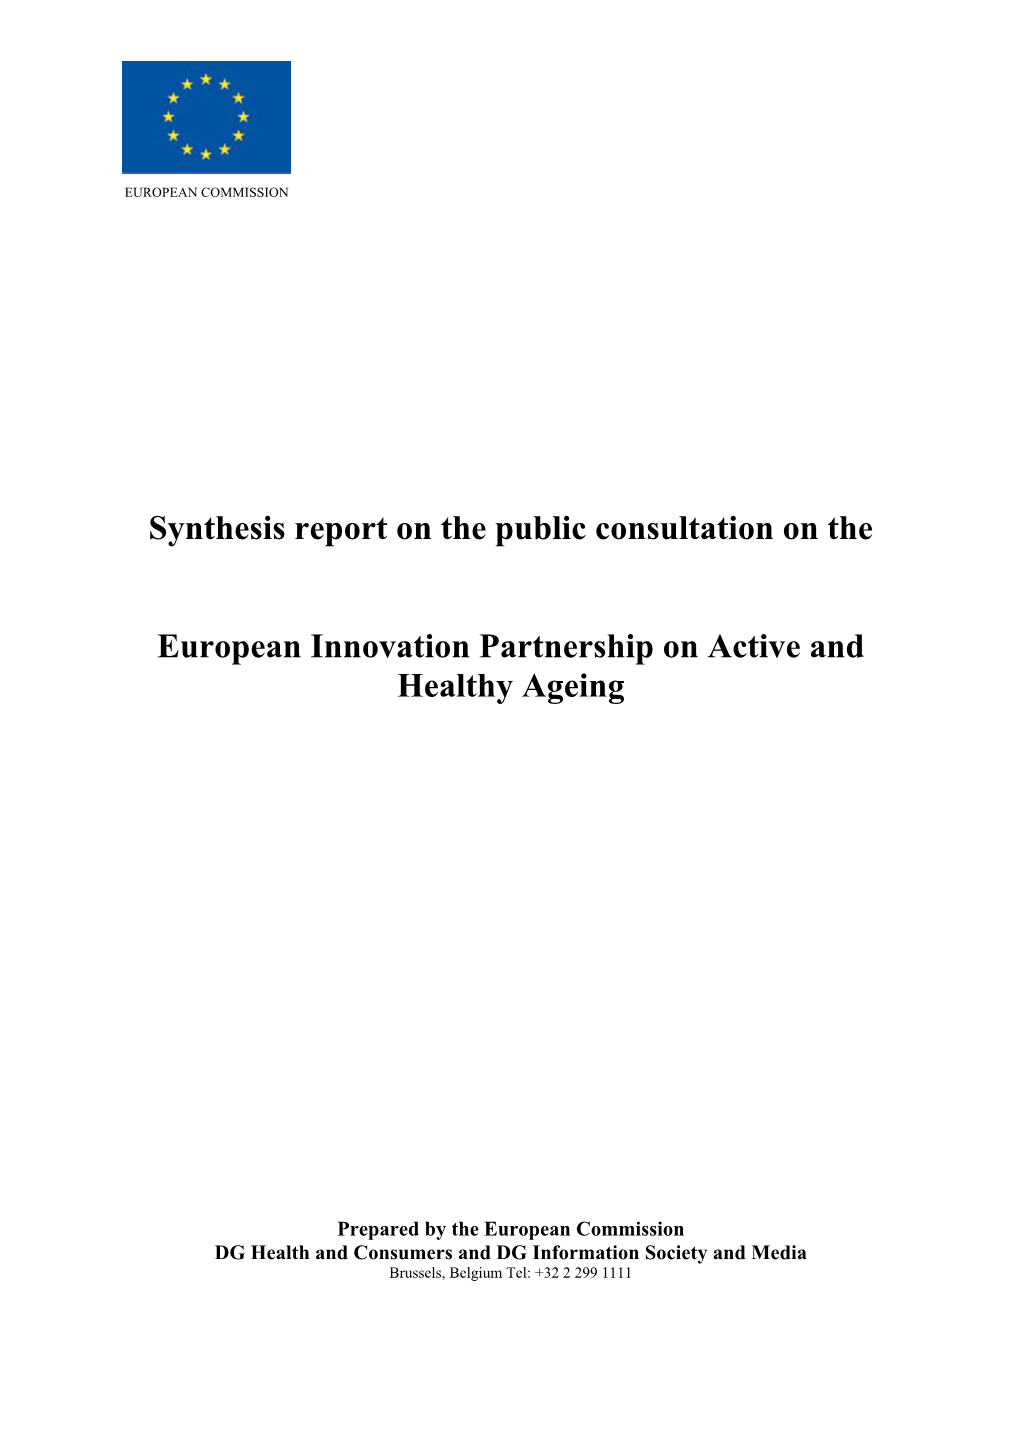 Synthesis Report on the Public Consultation on the European Innovation Partnership on Active and Healthy Ageing